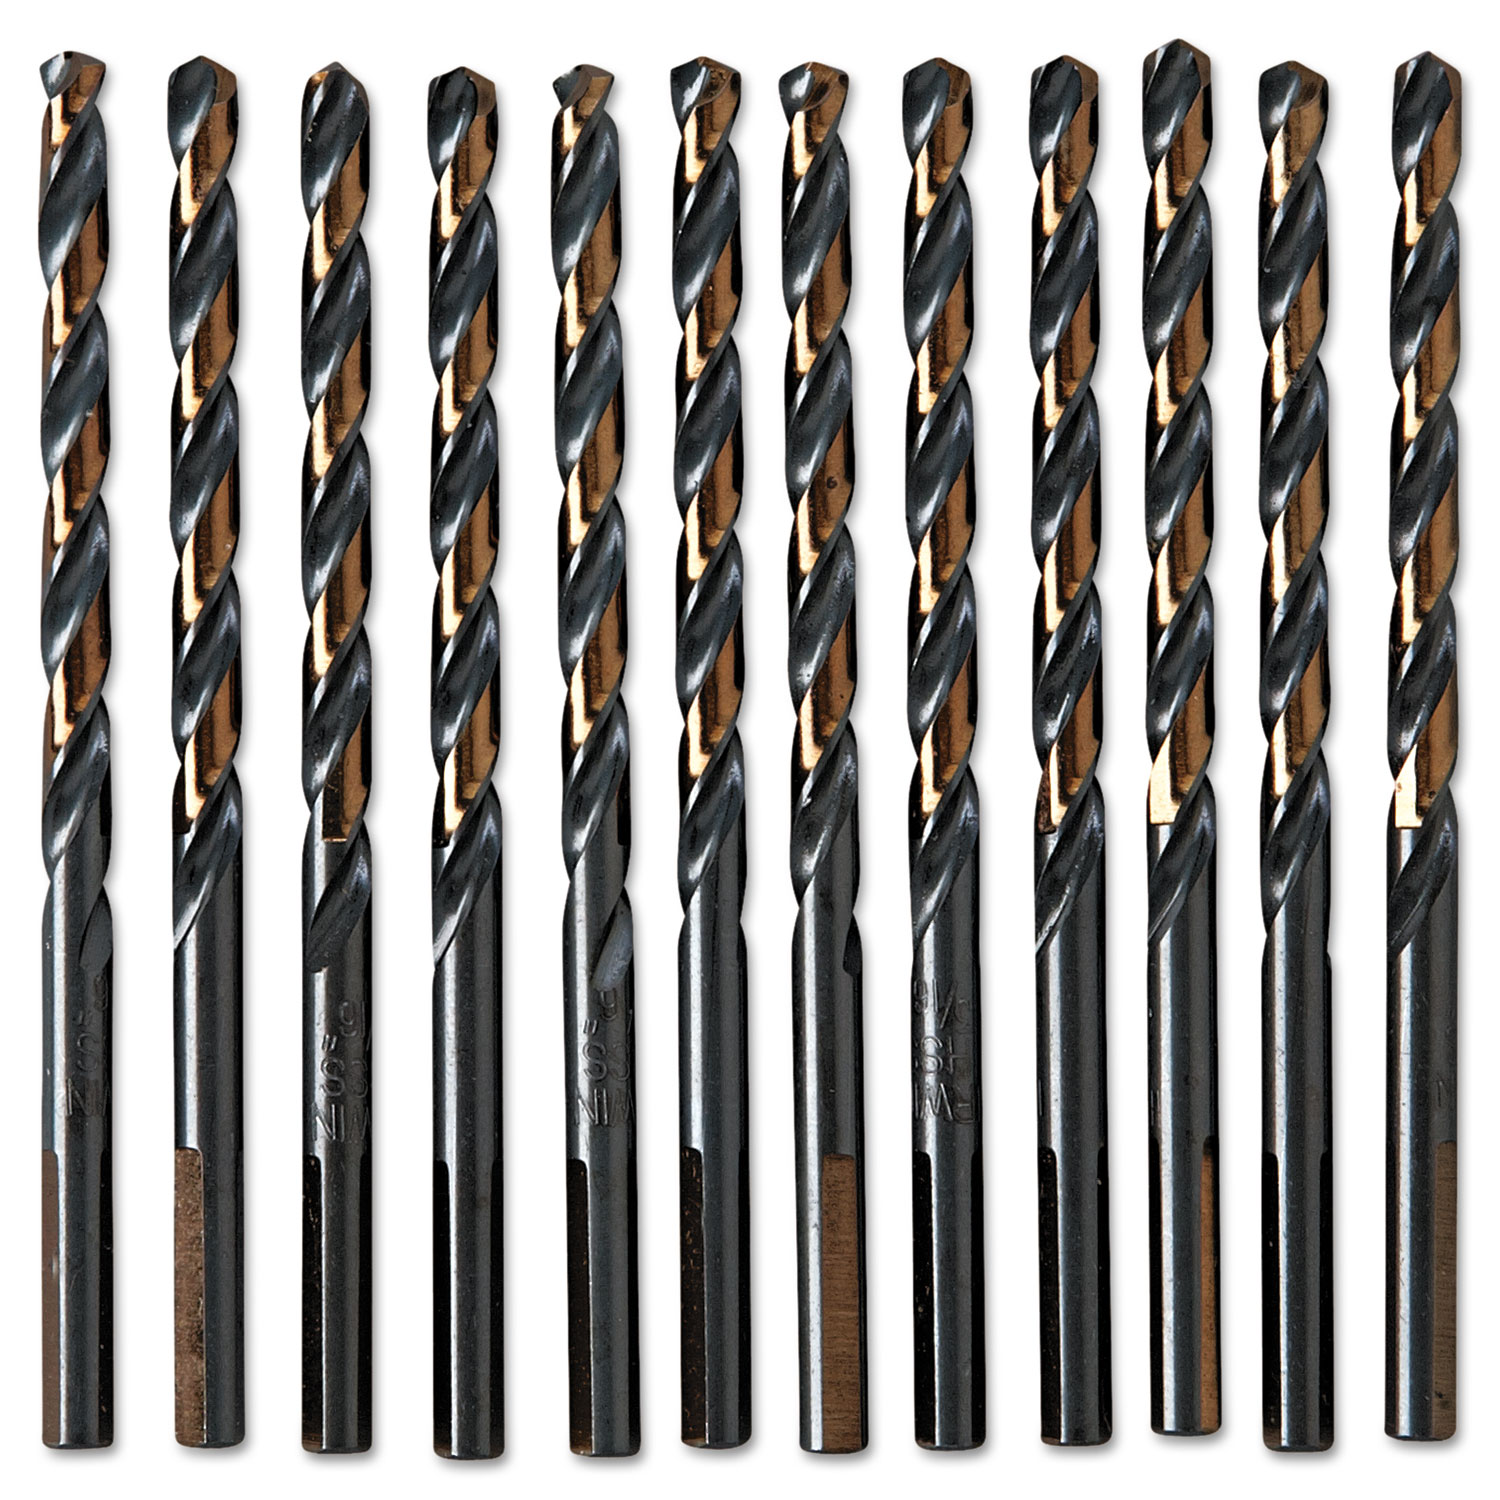 Black and Gold HSS Fractional Drill Bit, 3/16, 135 Degrees